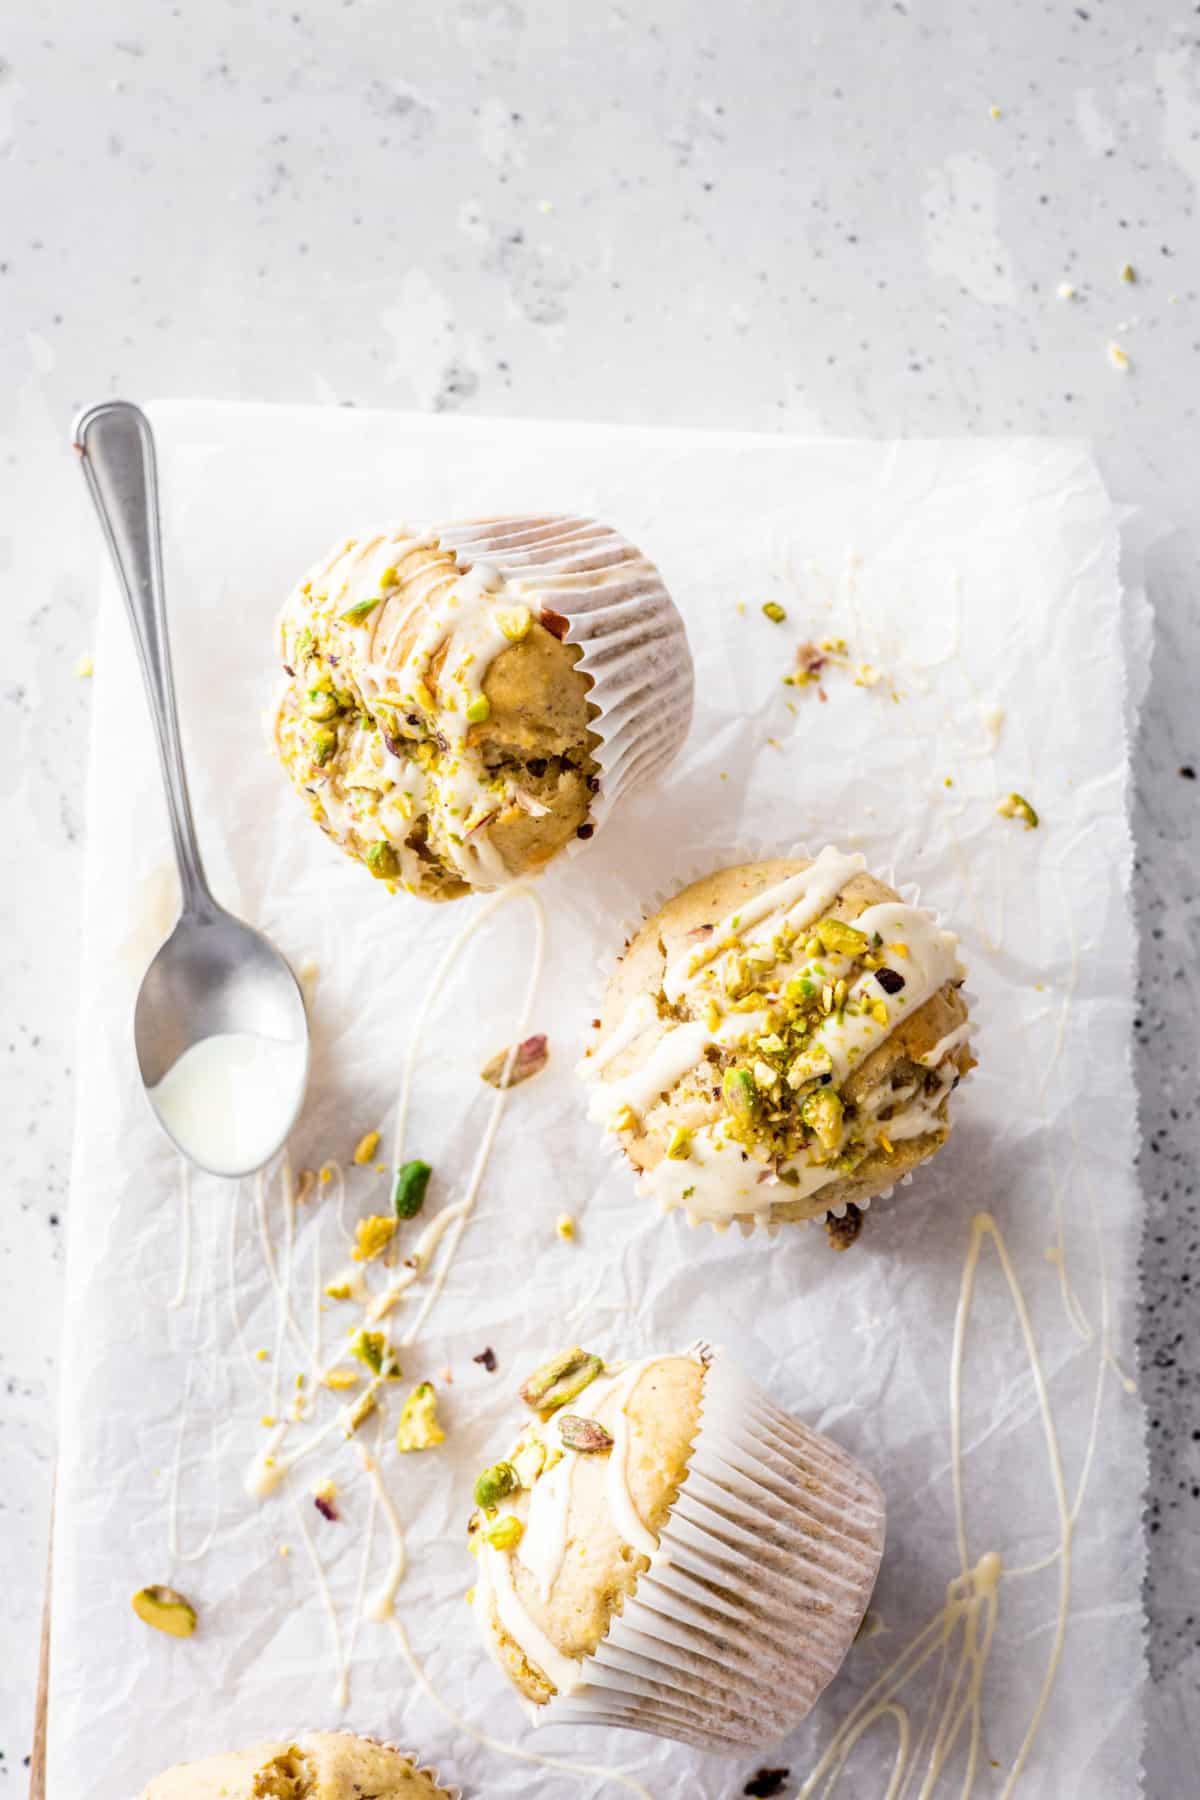 3 pistachio muffins with white chocolate glaze on a white background